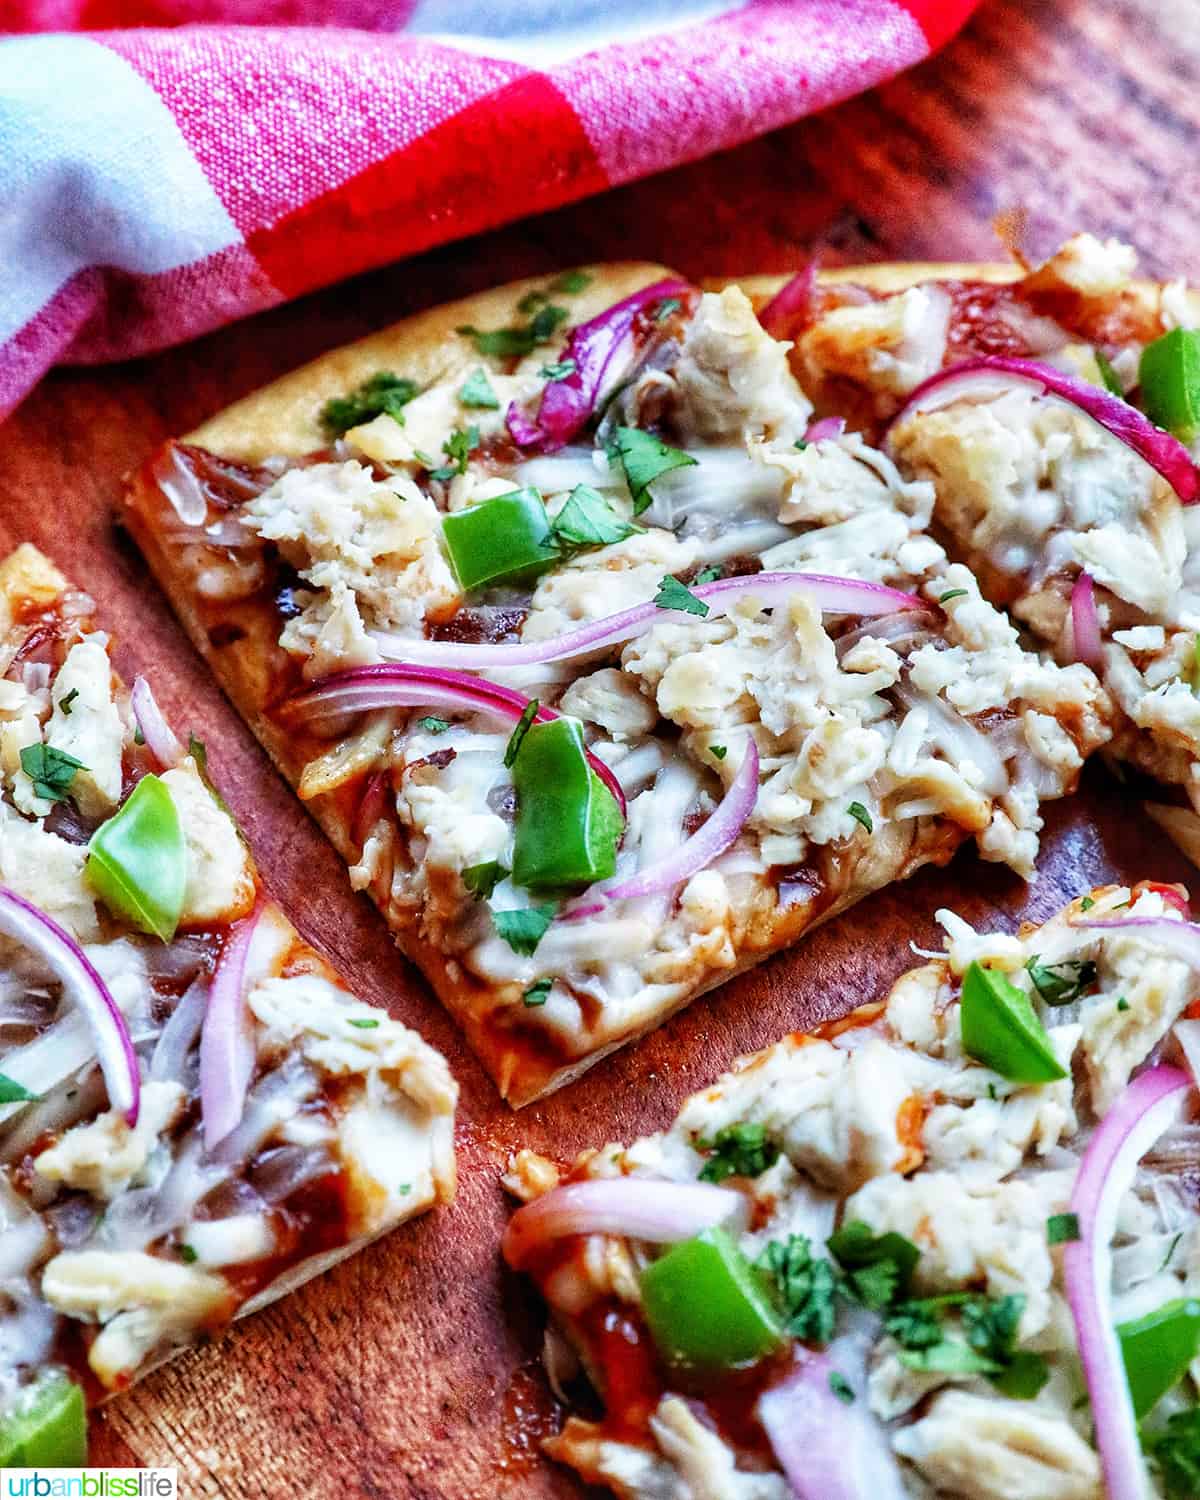 slices of barbecue chicken flatbread pizza with red onions, chicken breast, green peppers, and cilantro.